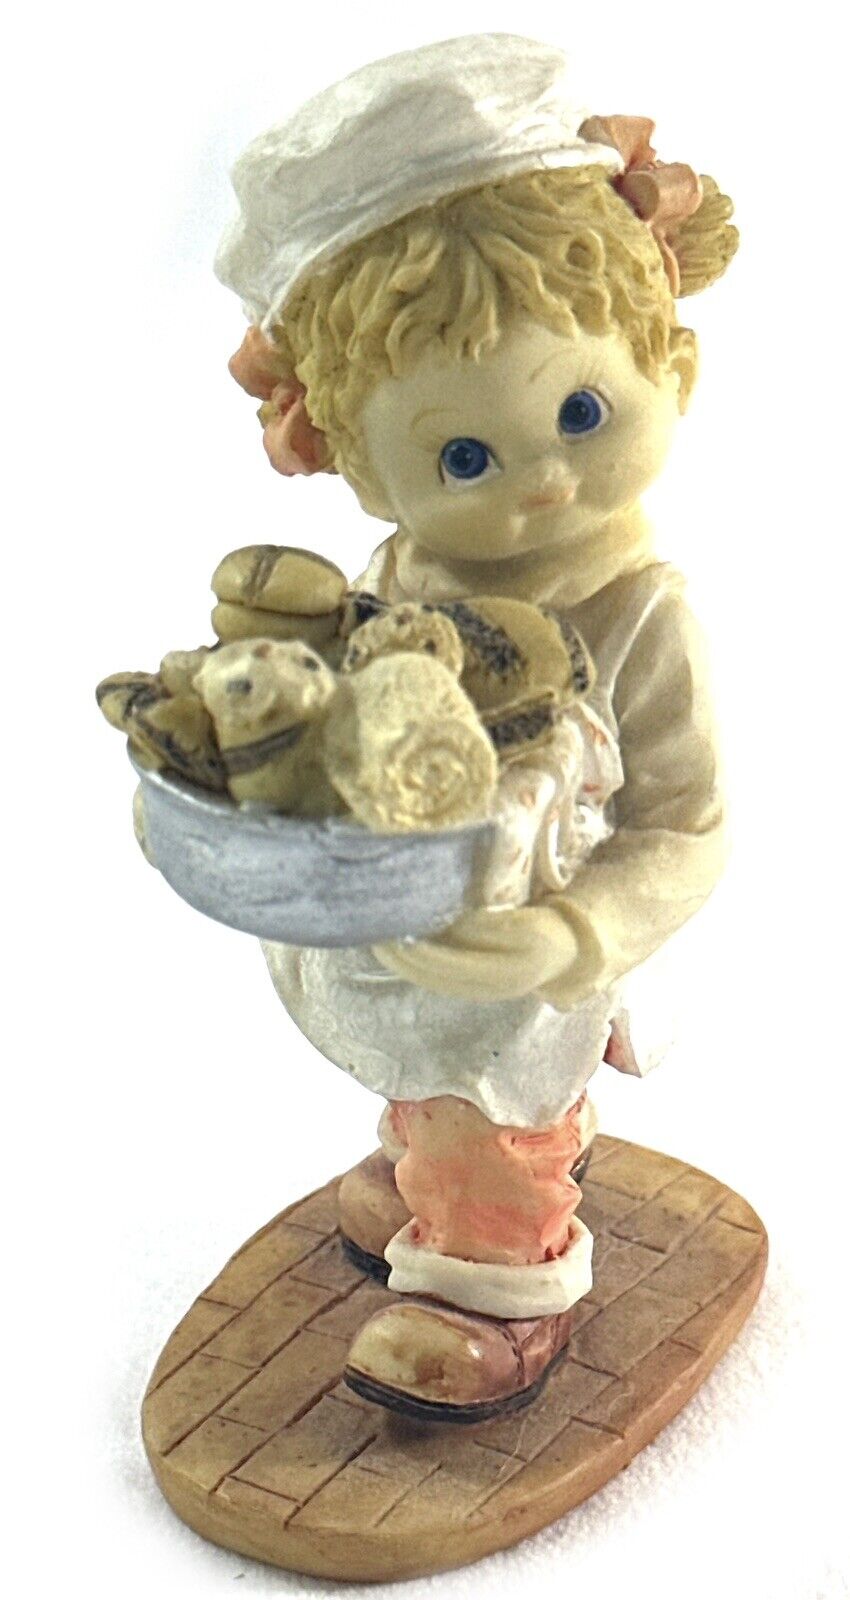 Vintage Figurine Girl Carrying Baked Goods 4” Tall